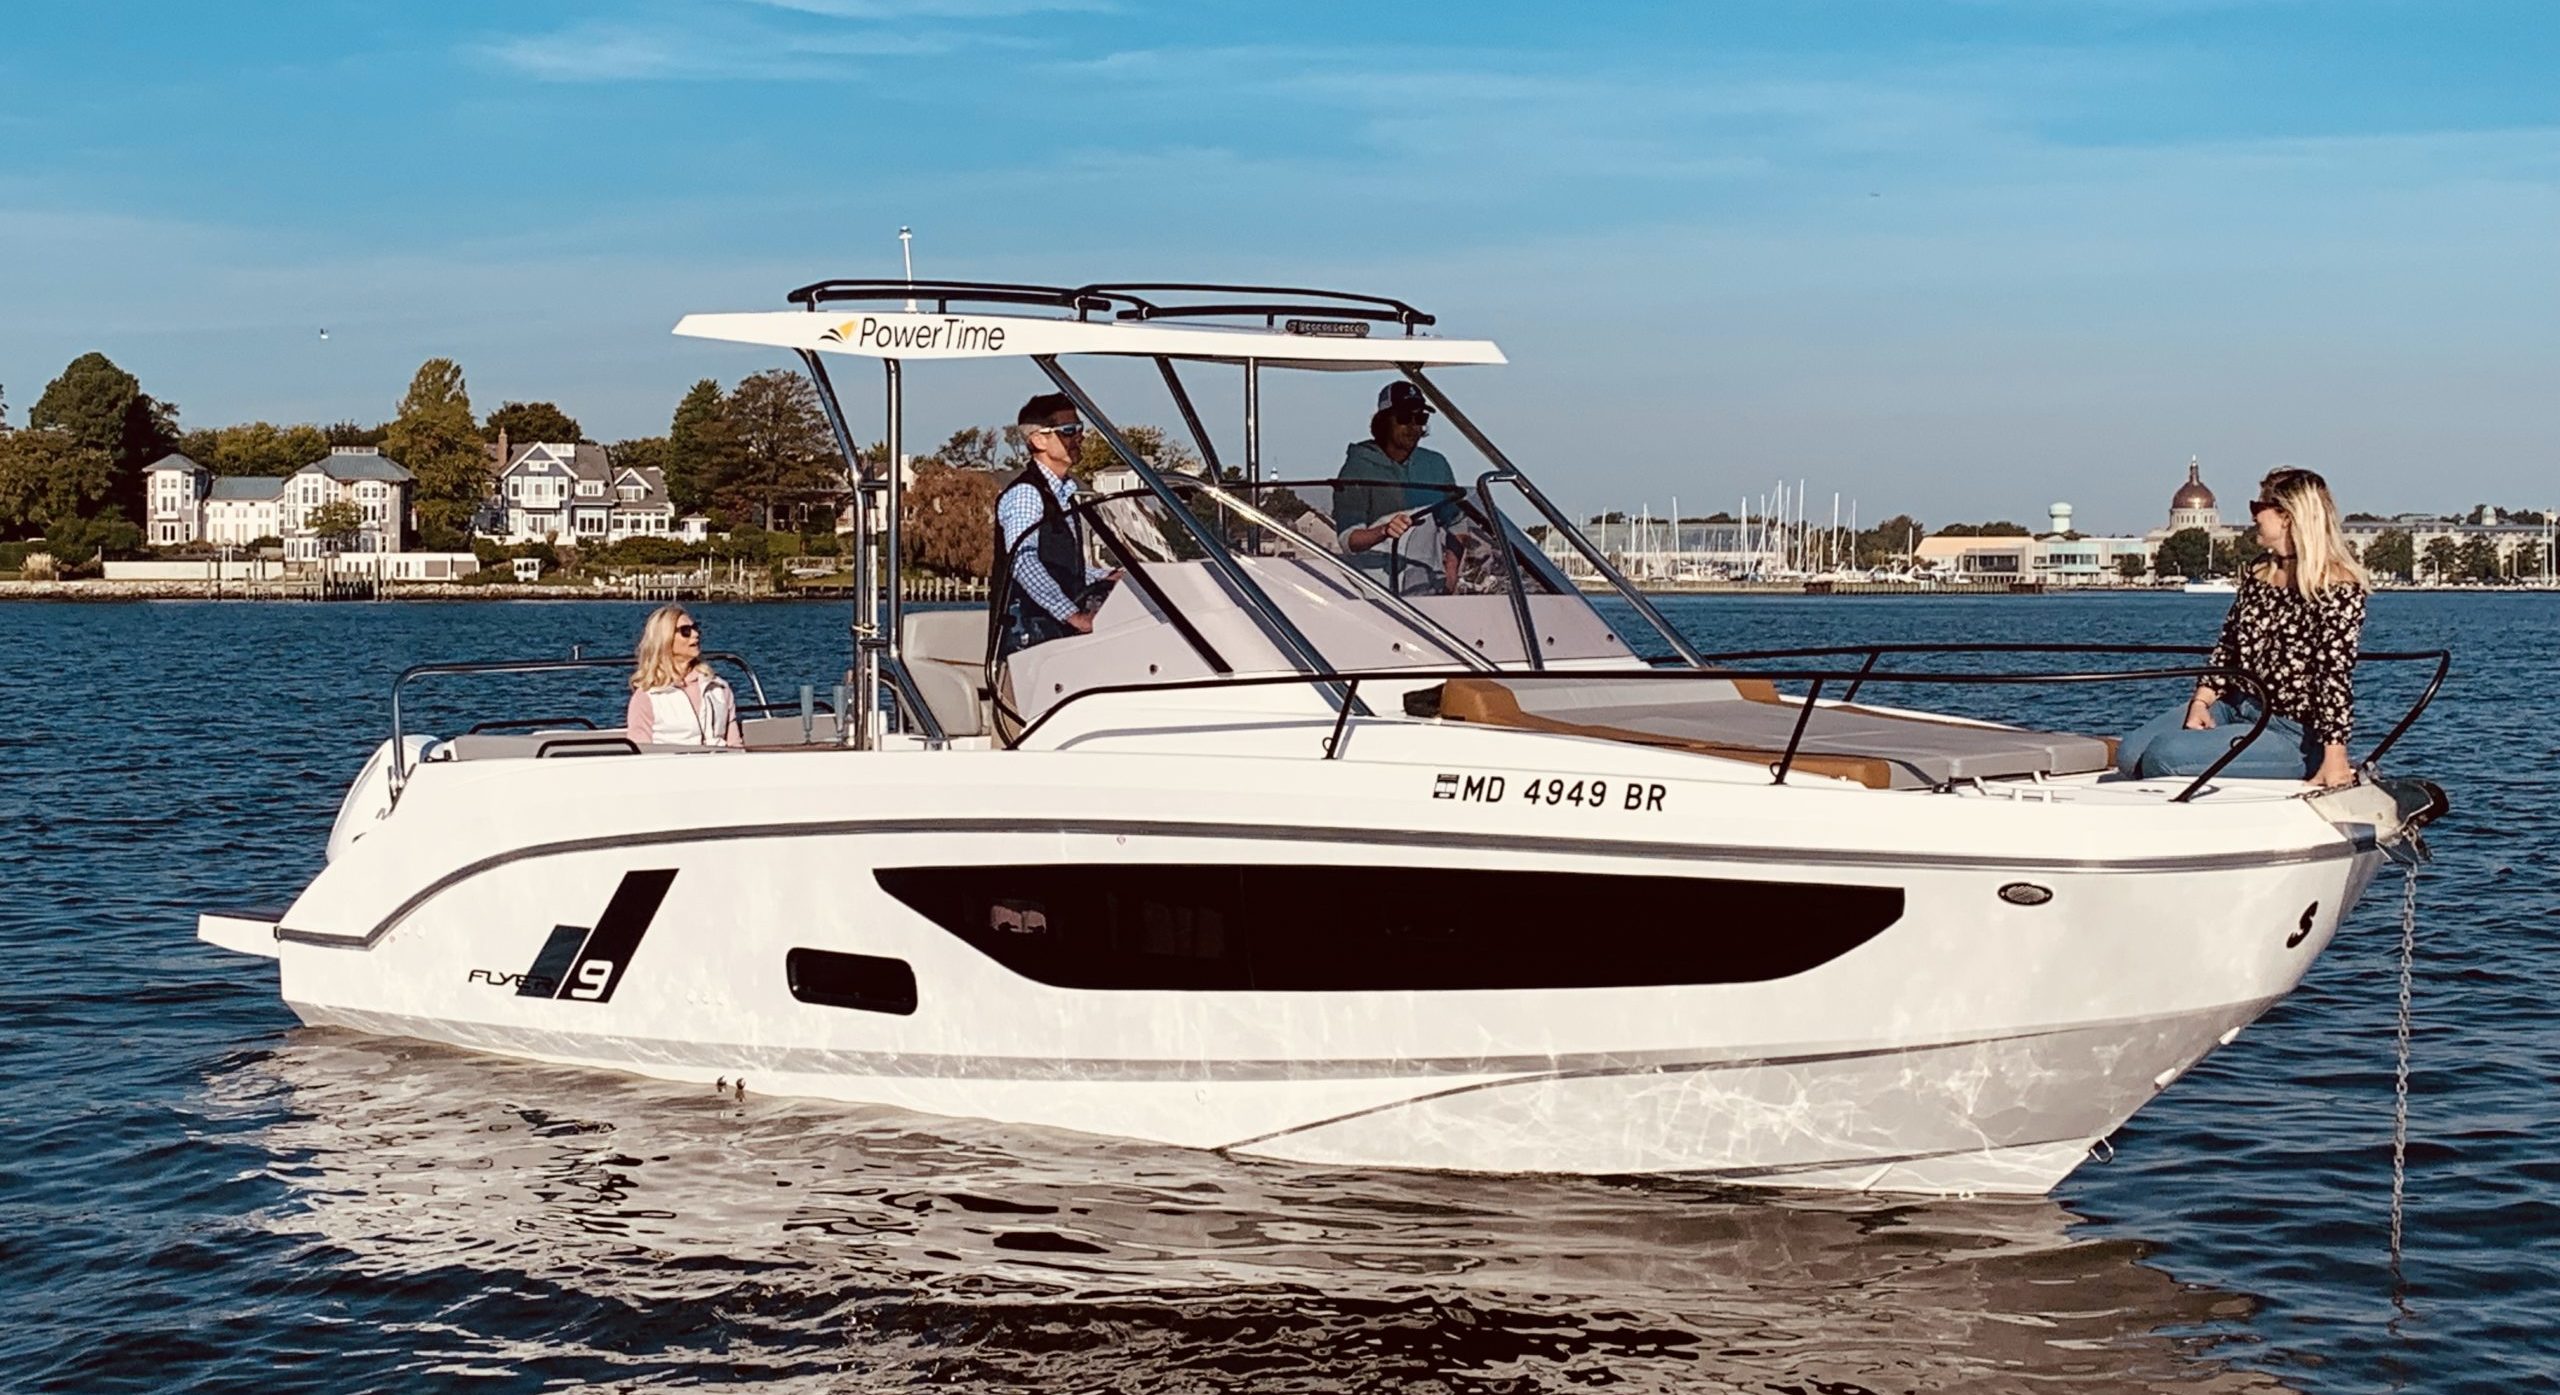 Boat All Season with PowerTime Annapolis